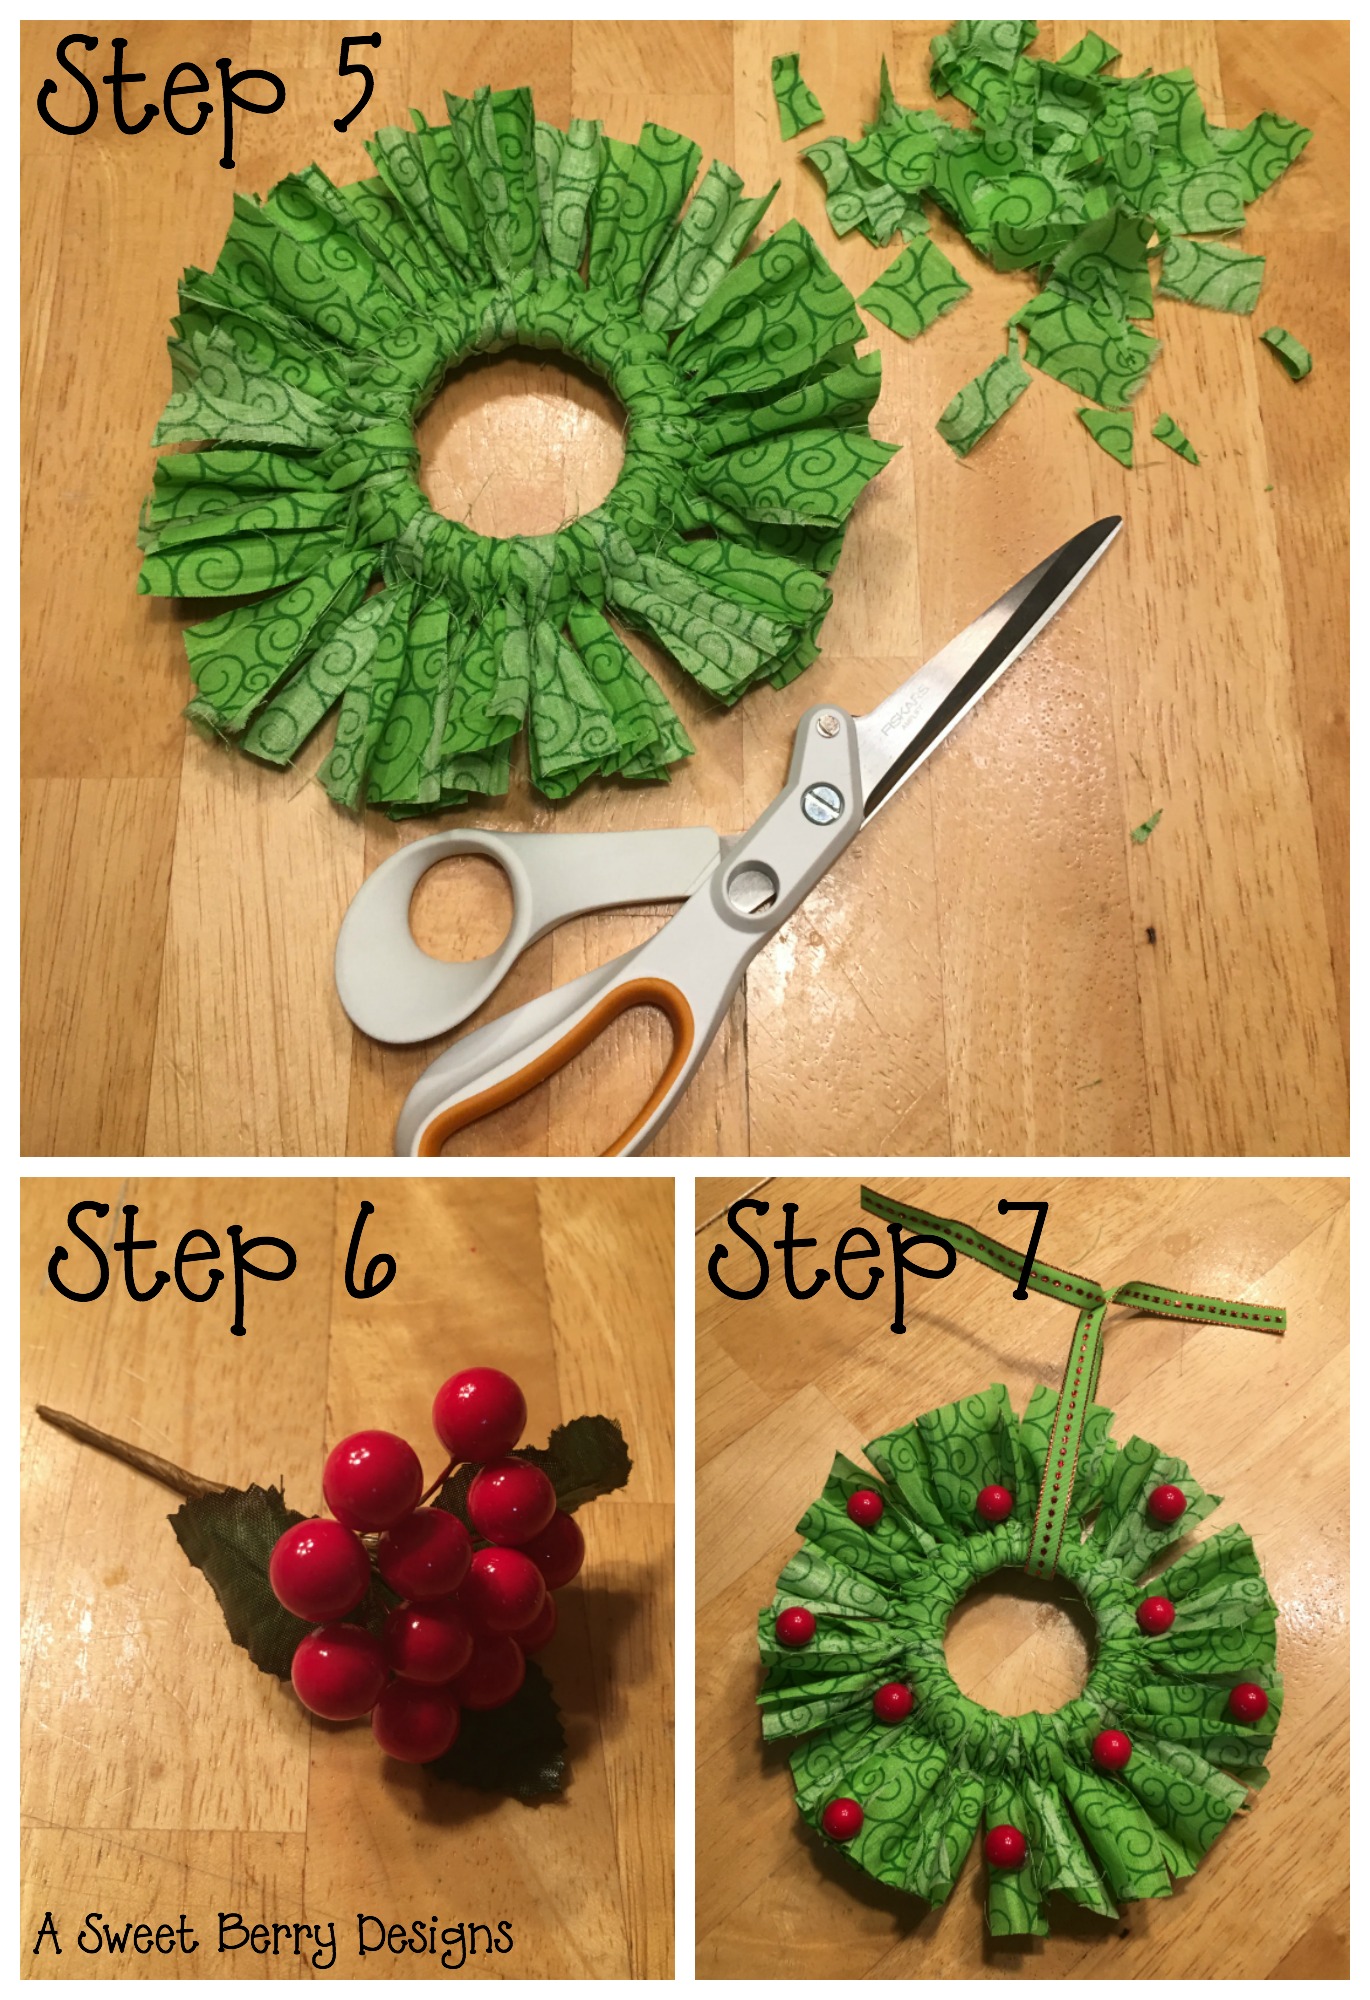 How to Make Mini Wreath Ornaments From Mason Jar Bands